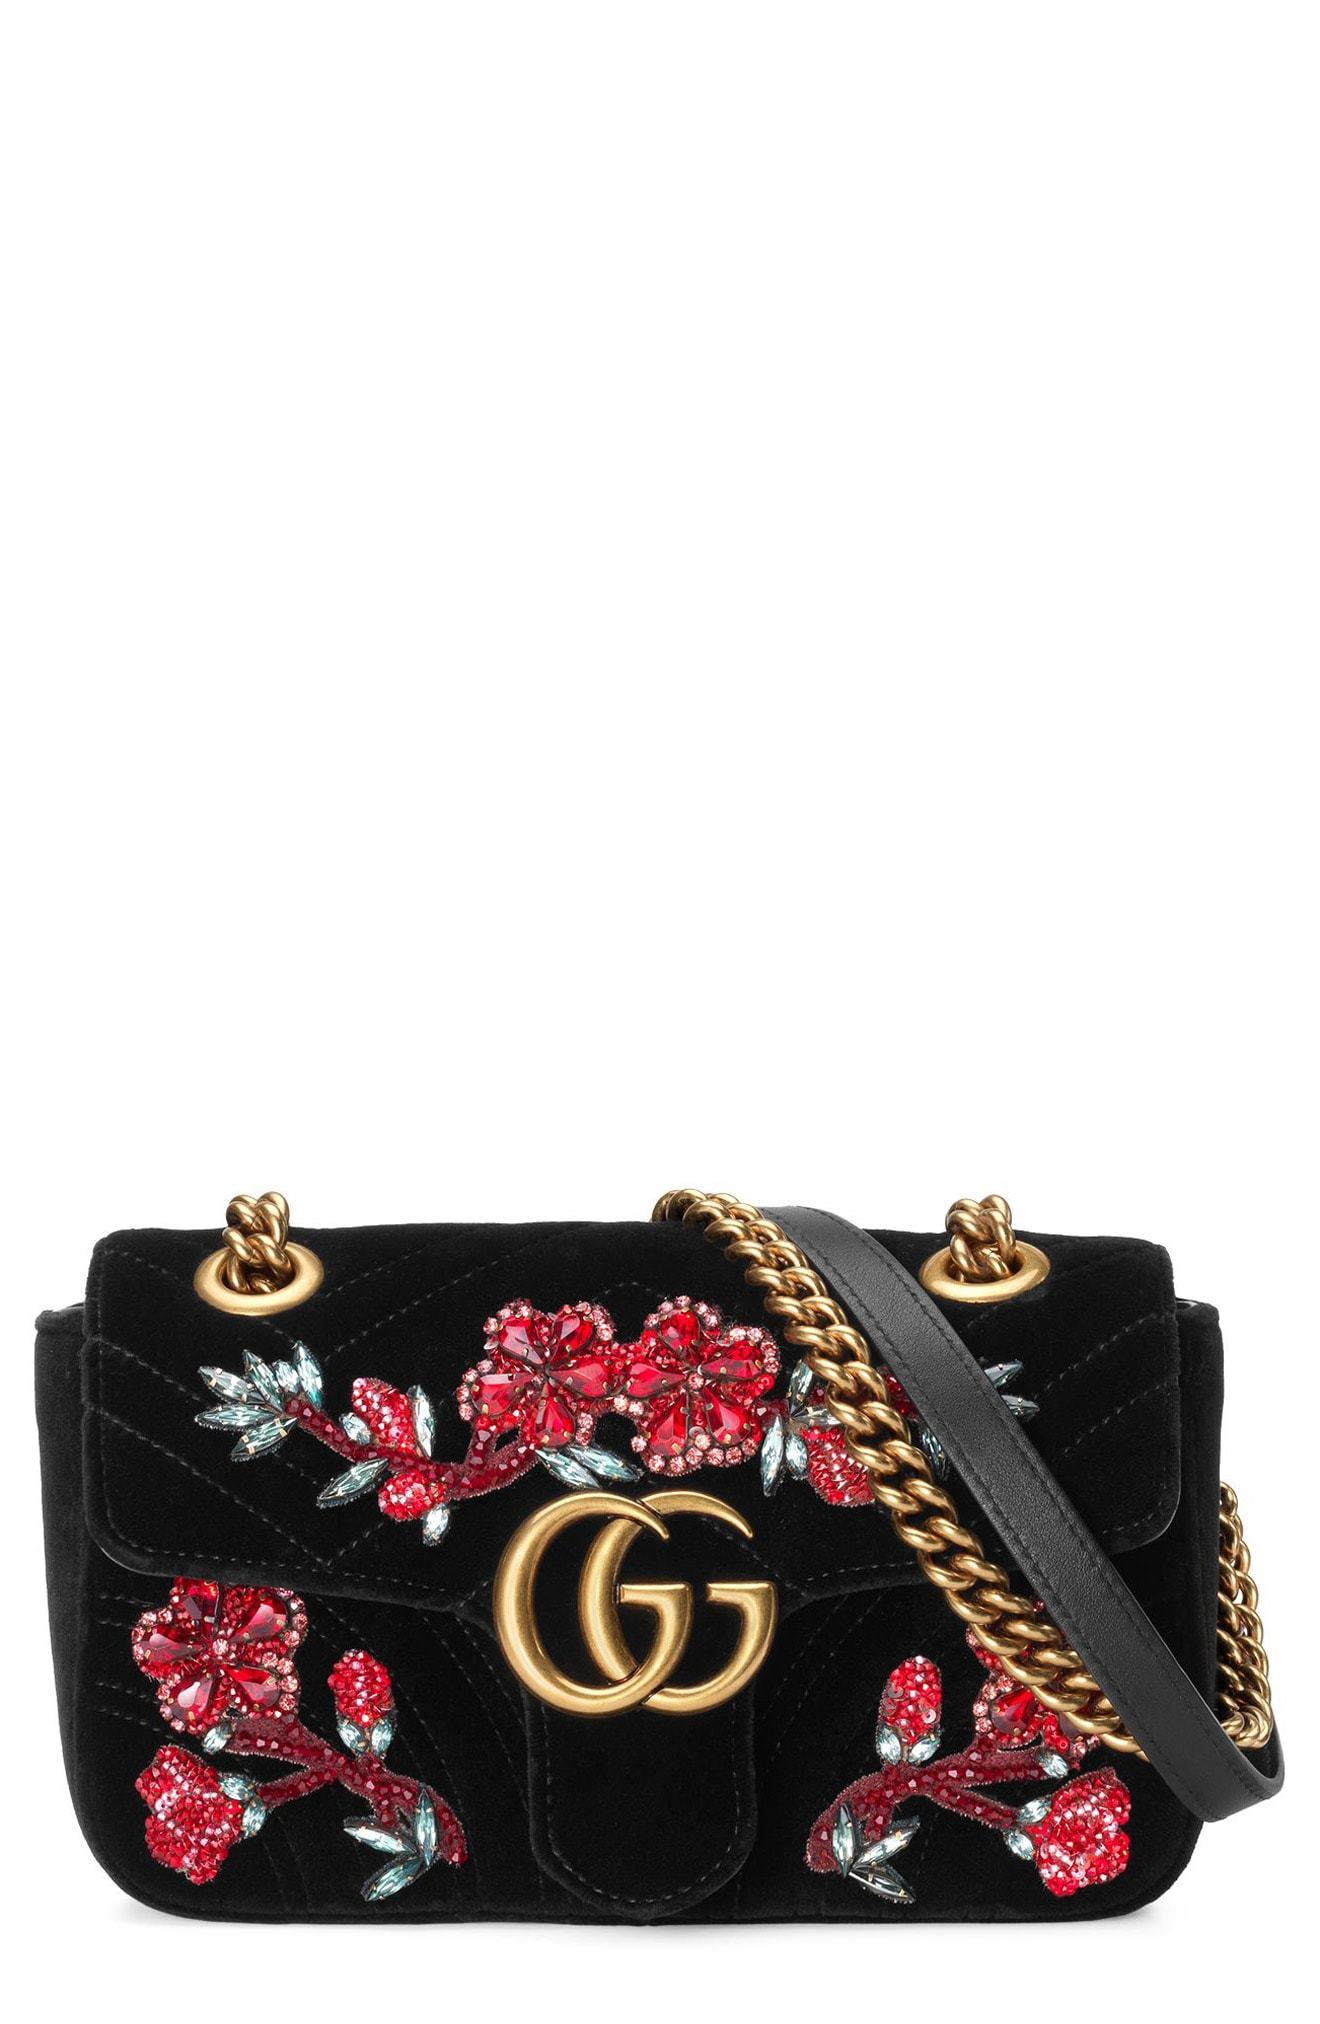 gucci marmont bag nordstrom